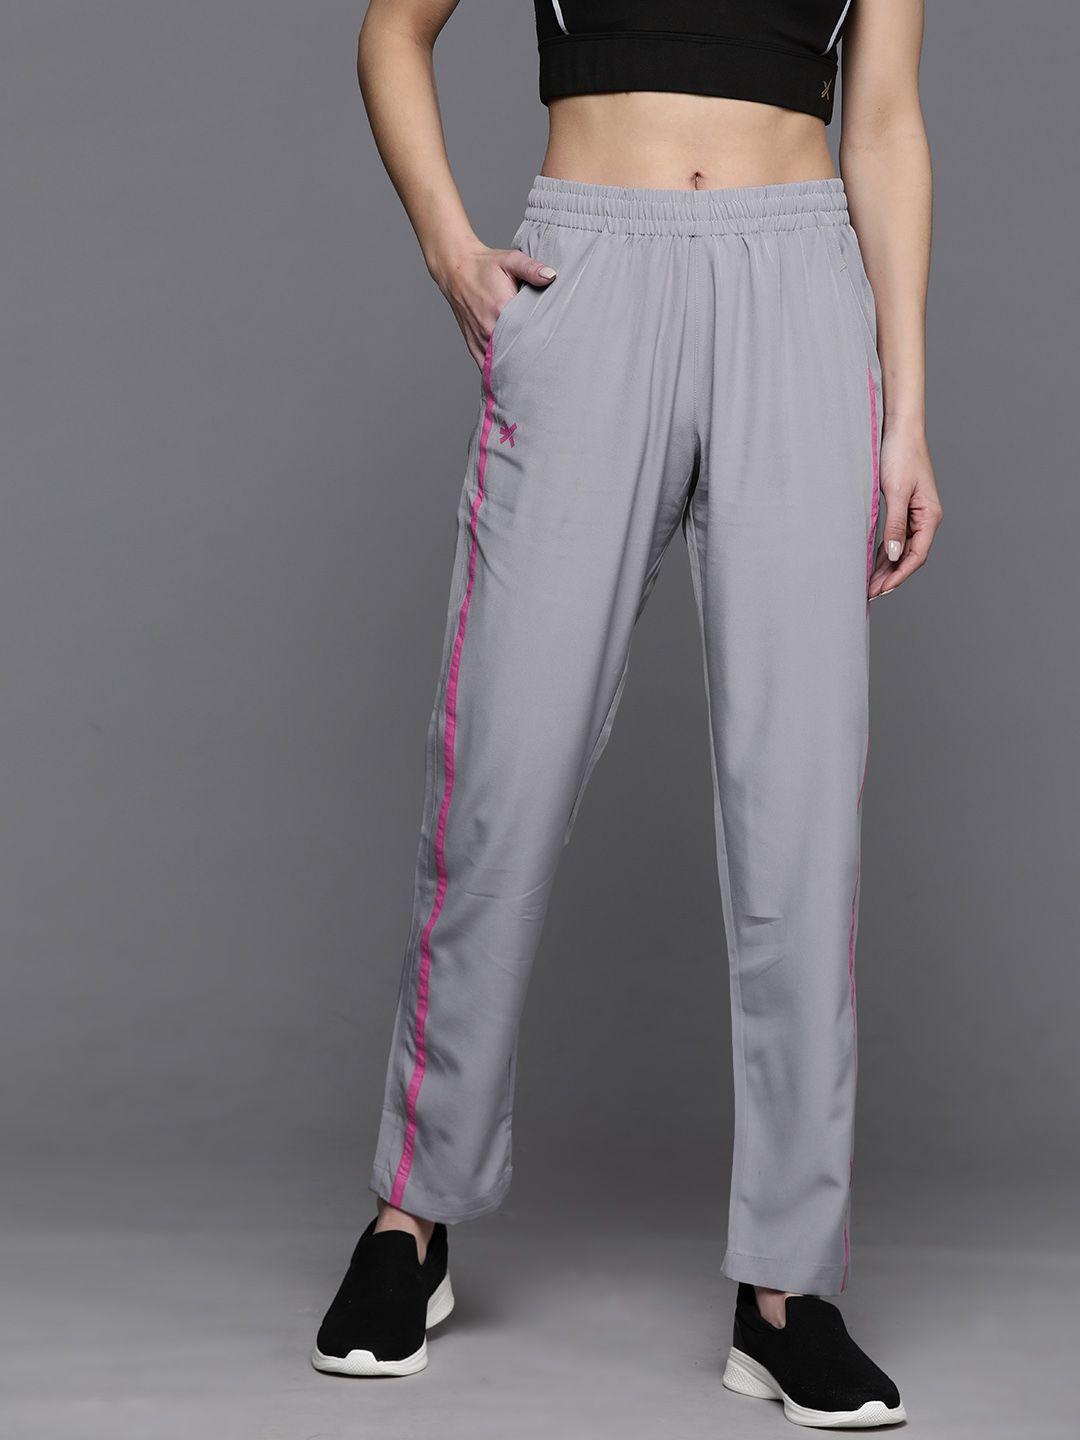 hrx by hrithik roshan women rapid-dry training track pants with reflective detail